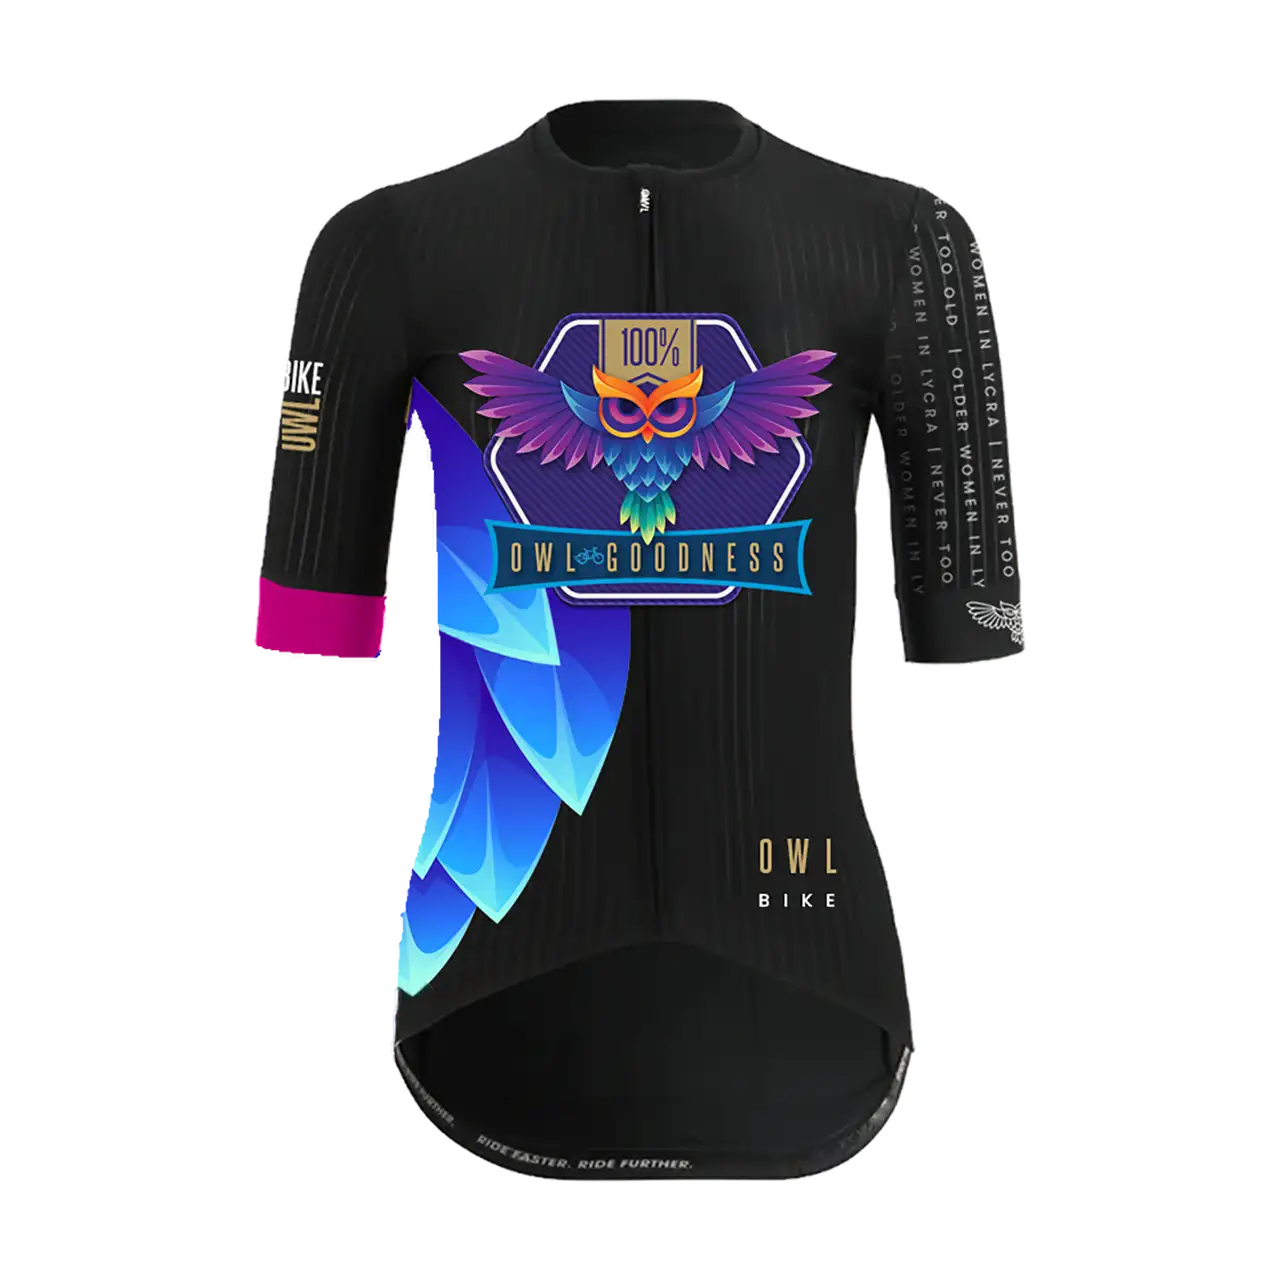 Product Team Owl Jersey 01 1280x1280